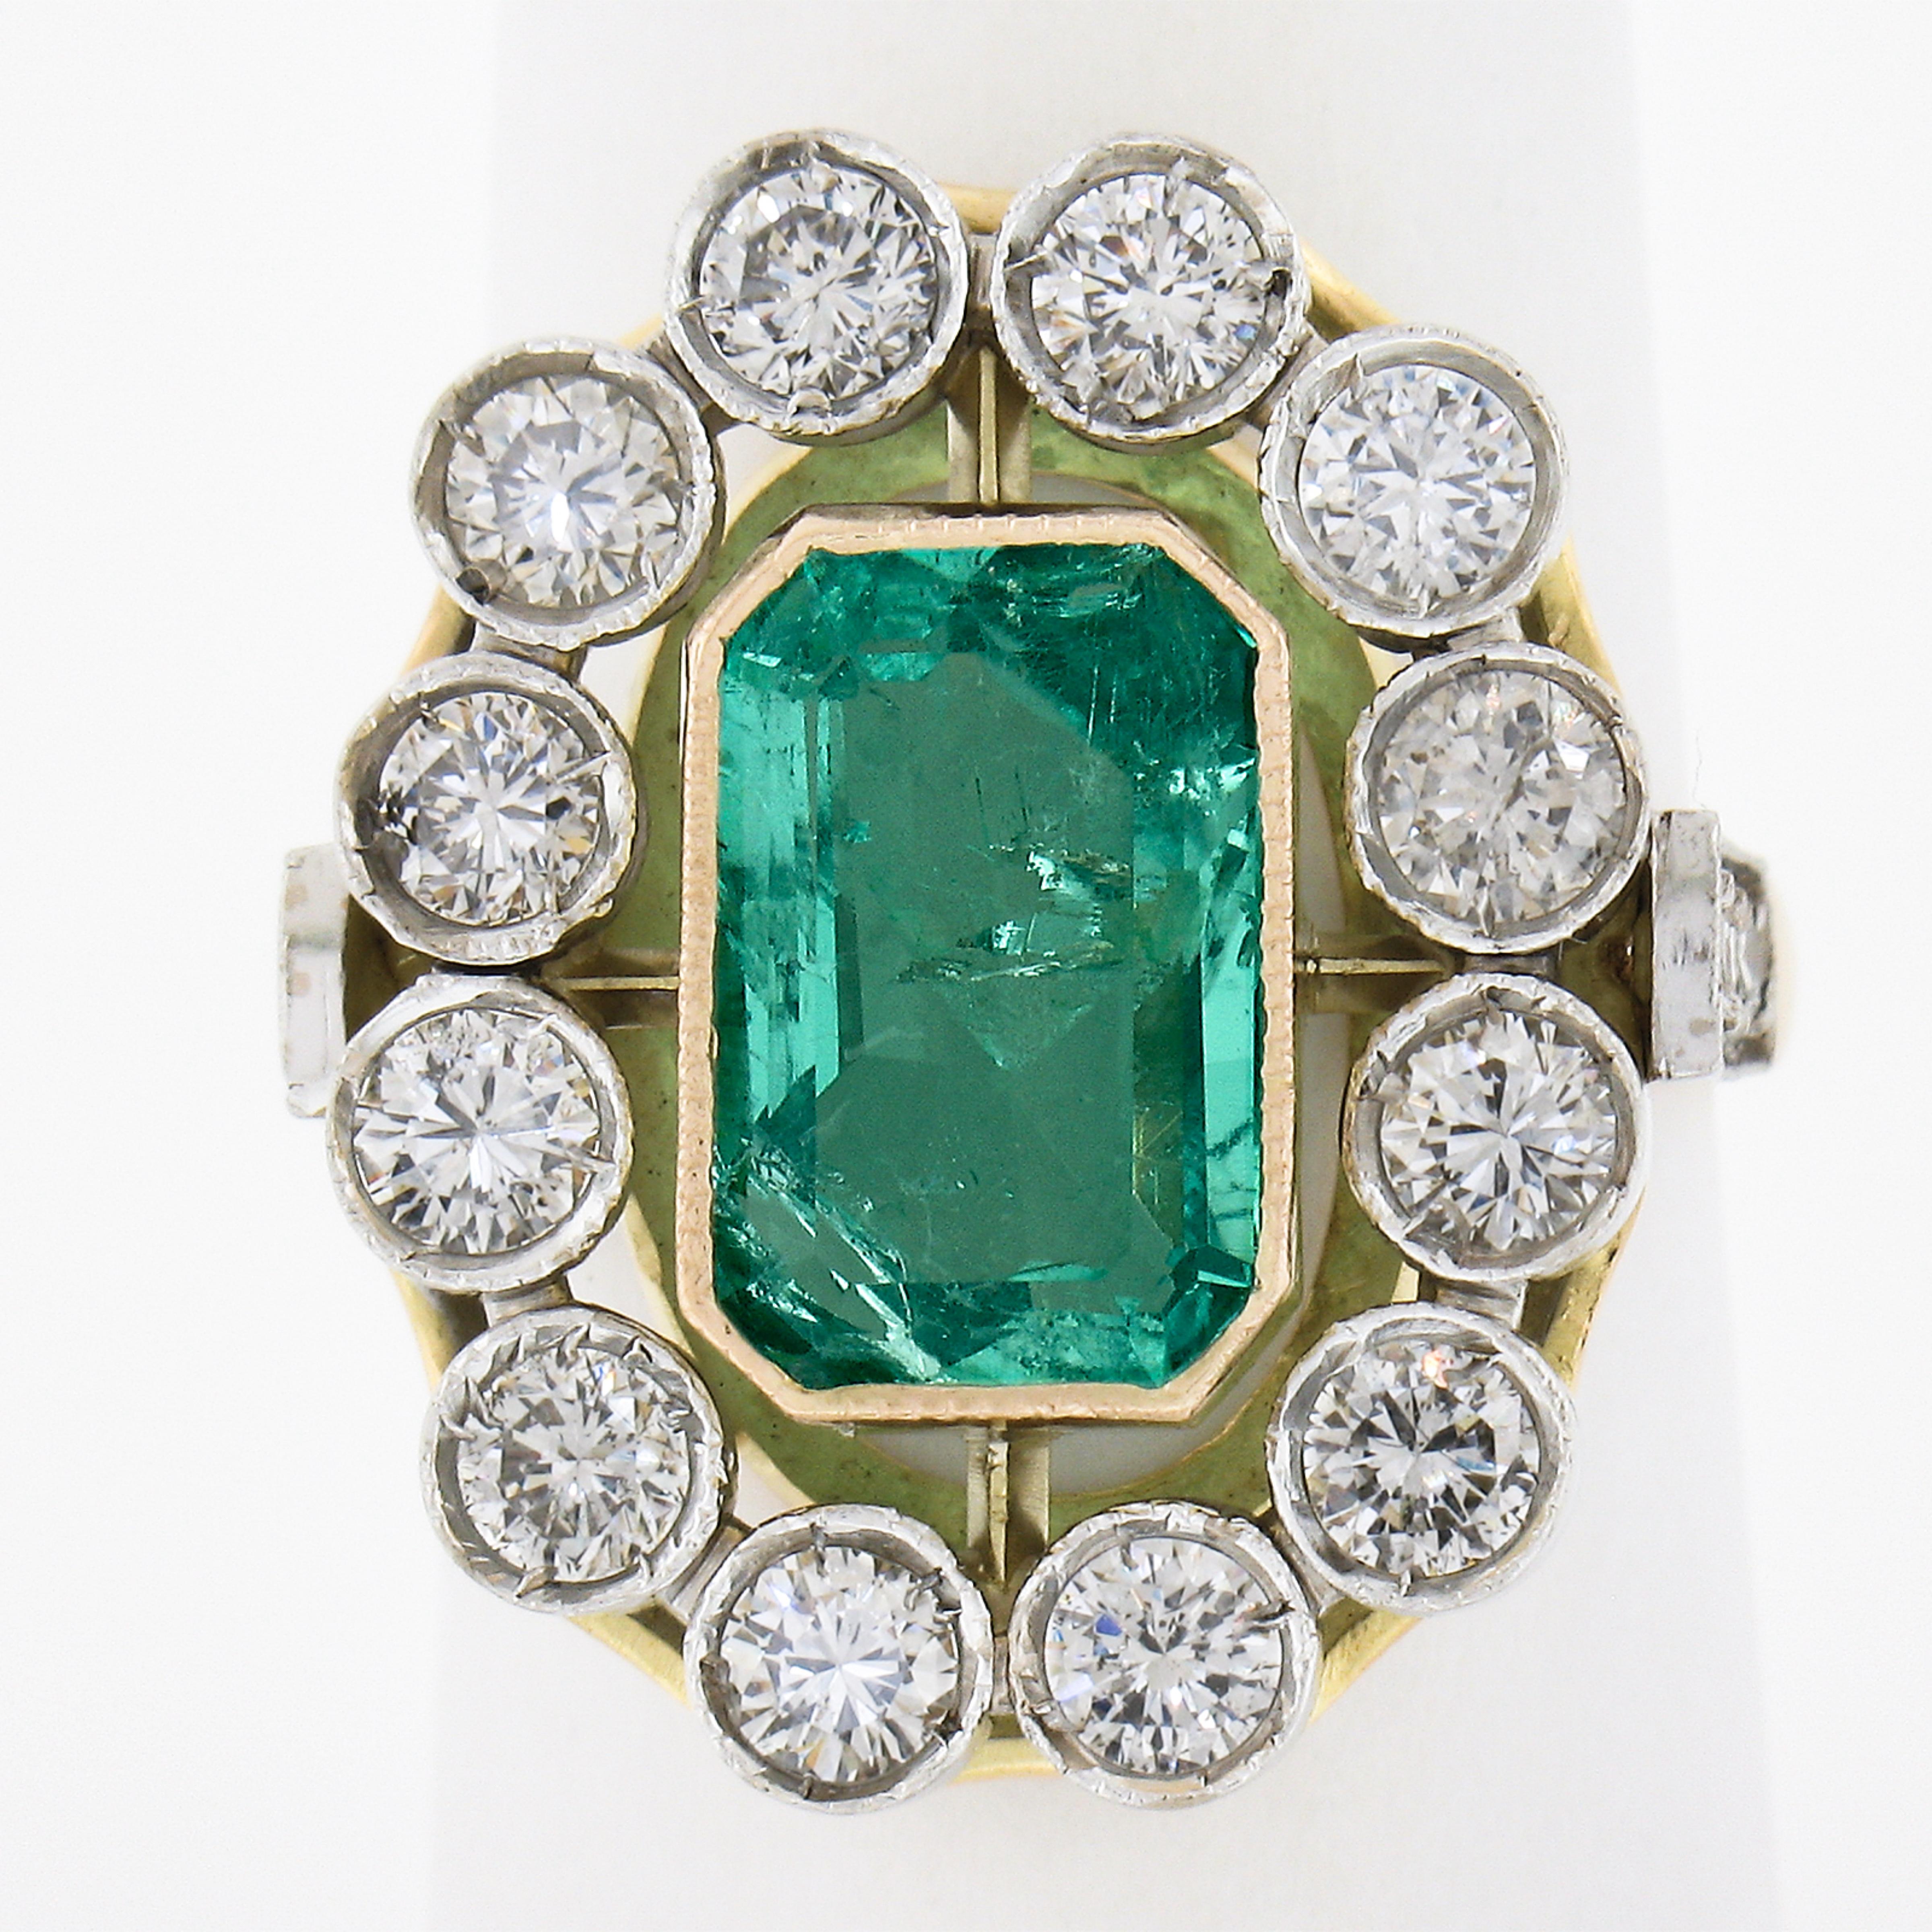 This magnificent emerald and diamond vintage cocktail ring features a GIA certified natural emerald with a nice elongated cut. This Colombian emerald displays light to medium green color and weighs approximately 2.60 carats. The nice large diamonds